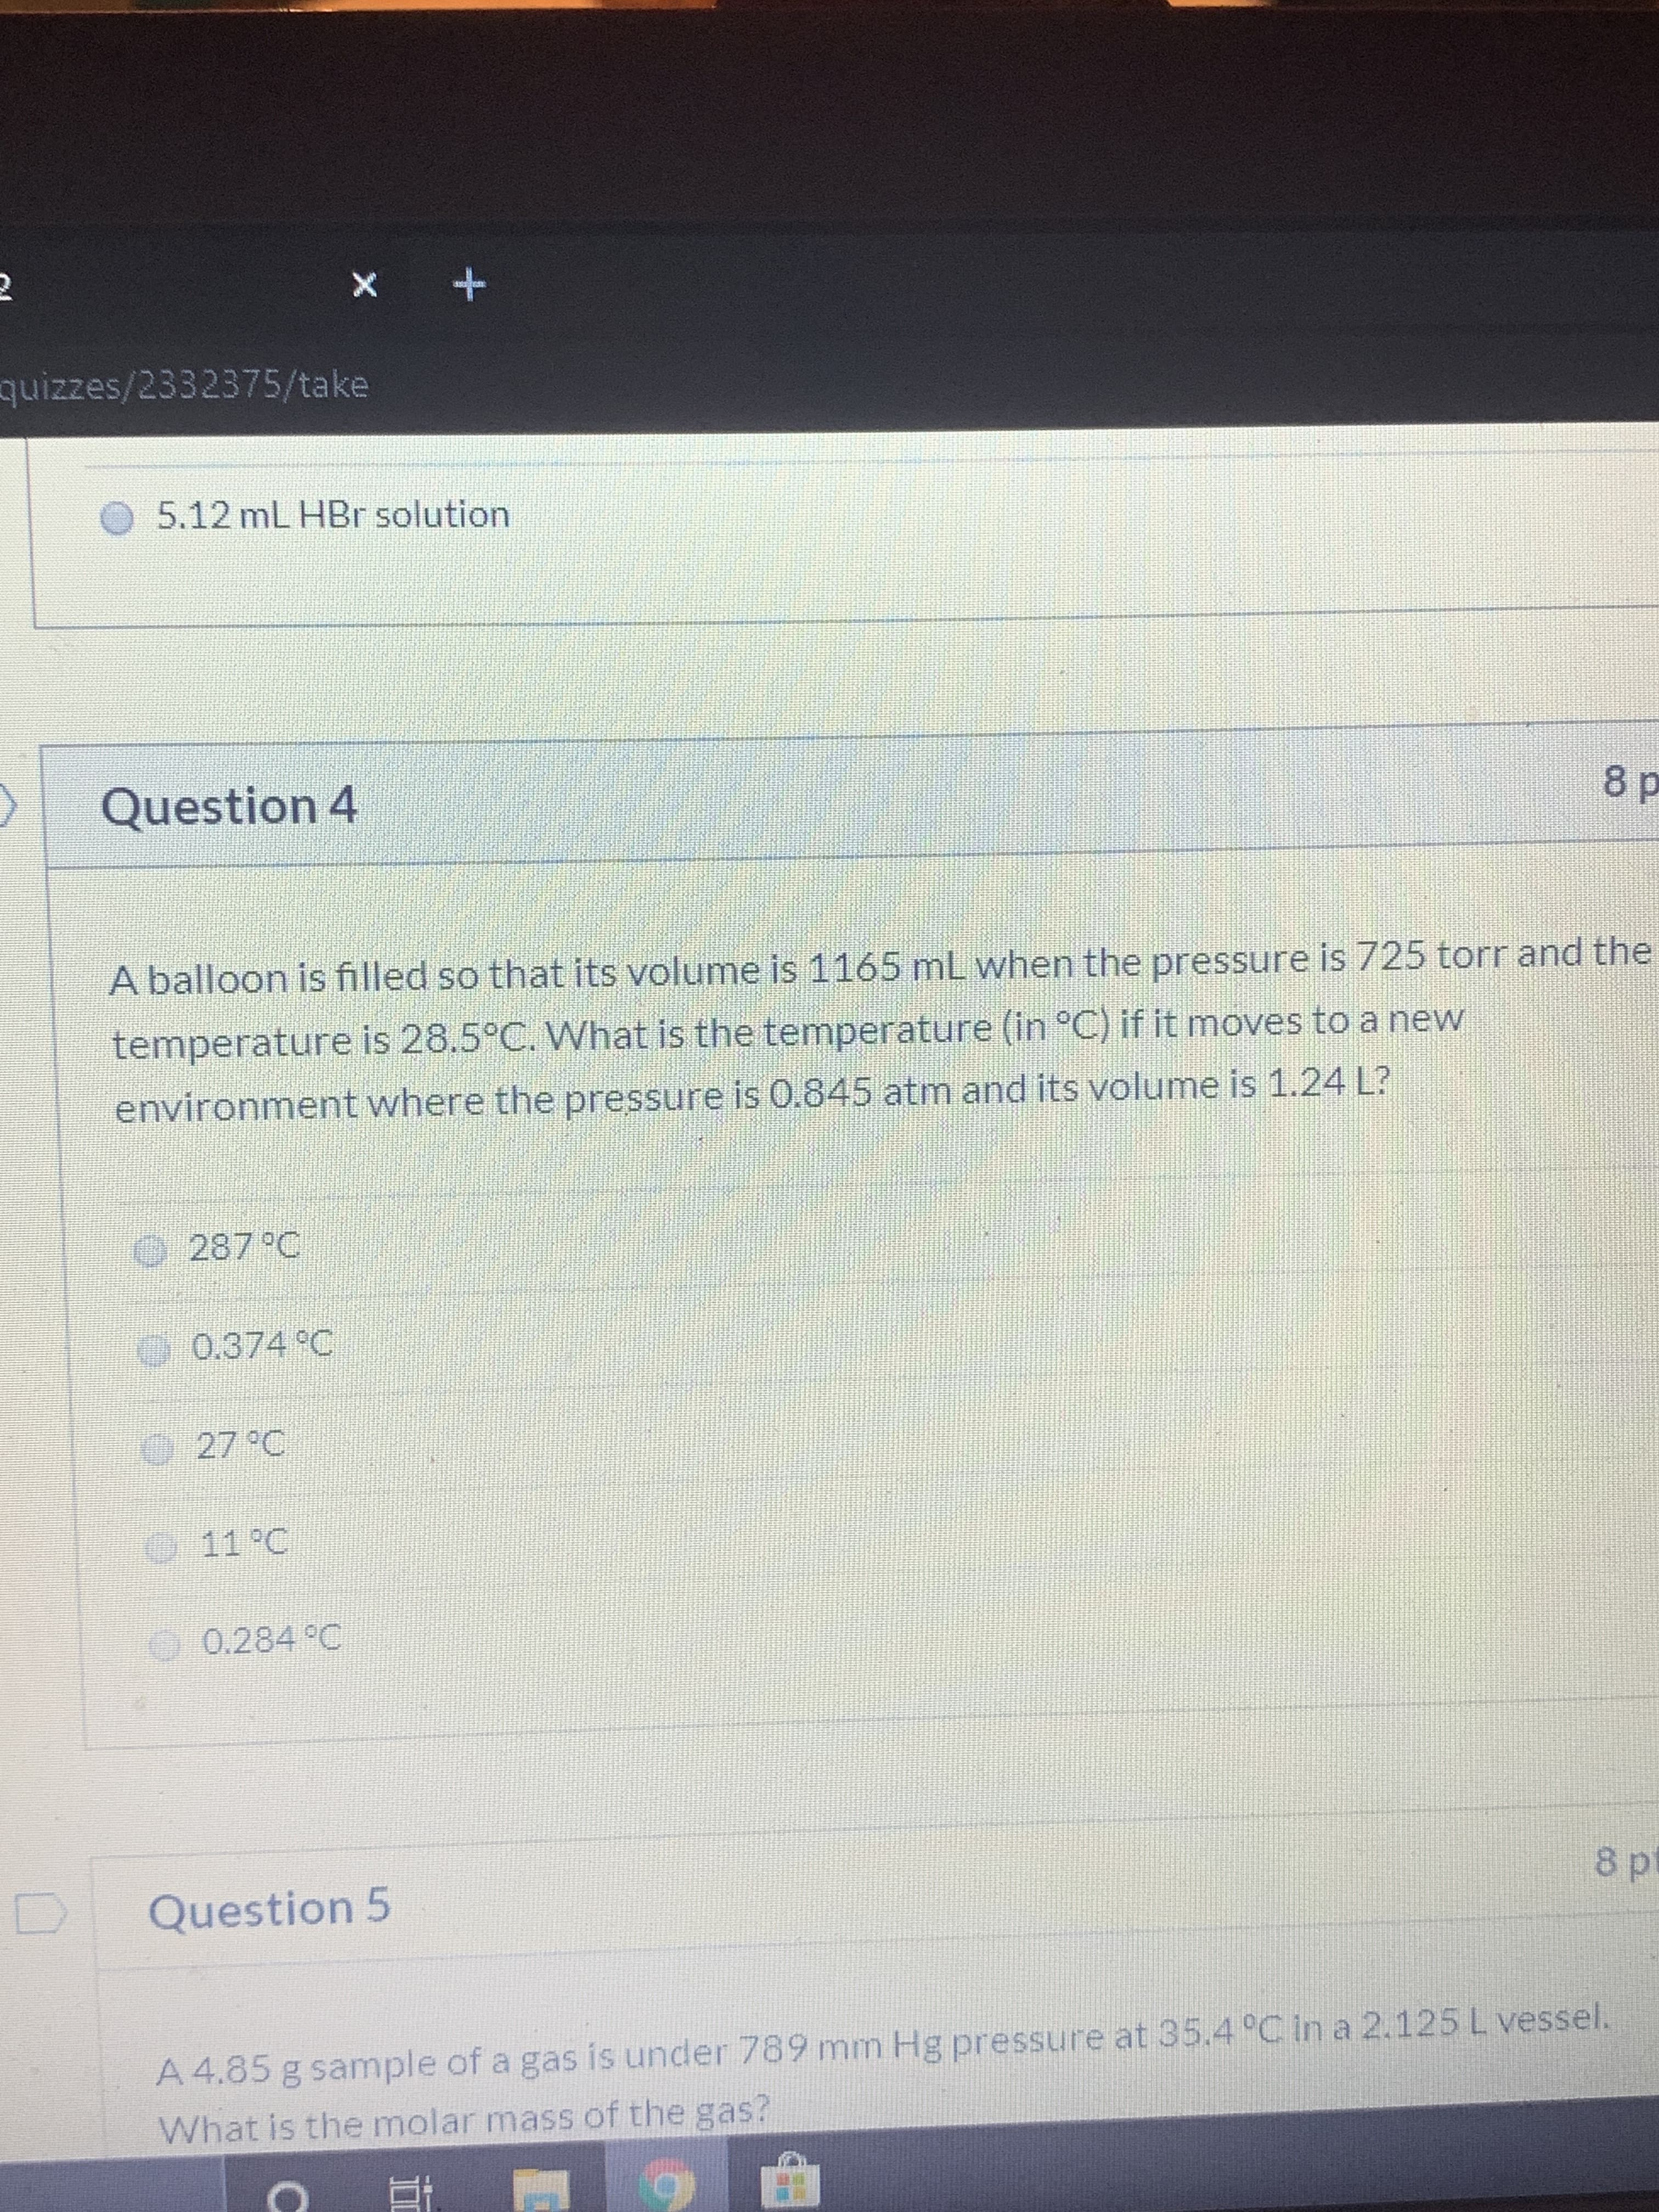 quizzes/2332375/take
O 5.12 mL HBr solution
Question 4
8 p
A balloon is filled so that its volume is 1165 mL when the pressure is 725 torr and the
temperature is 28.5°C. What is the temperature (in °C) if it moves to a new
environment where the pressure is 0.845 atm and its volume is 1.24 L?
O287 °C
.0.374 C
27 °C
0
11°C
O 0.284 °C
8p
Question 5
A 4.85 g sample of a gas is under 789 mm Hg pressure at 35.4 °C in a 2.125 L vessel.
What is the molar mass of the gas?
